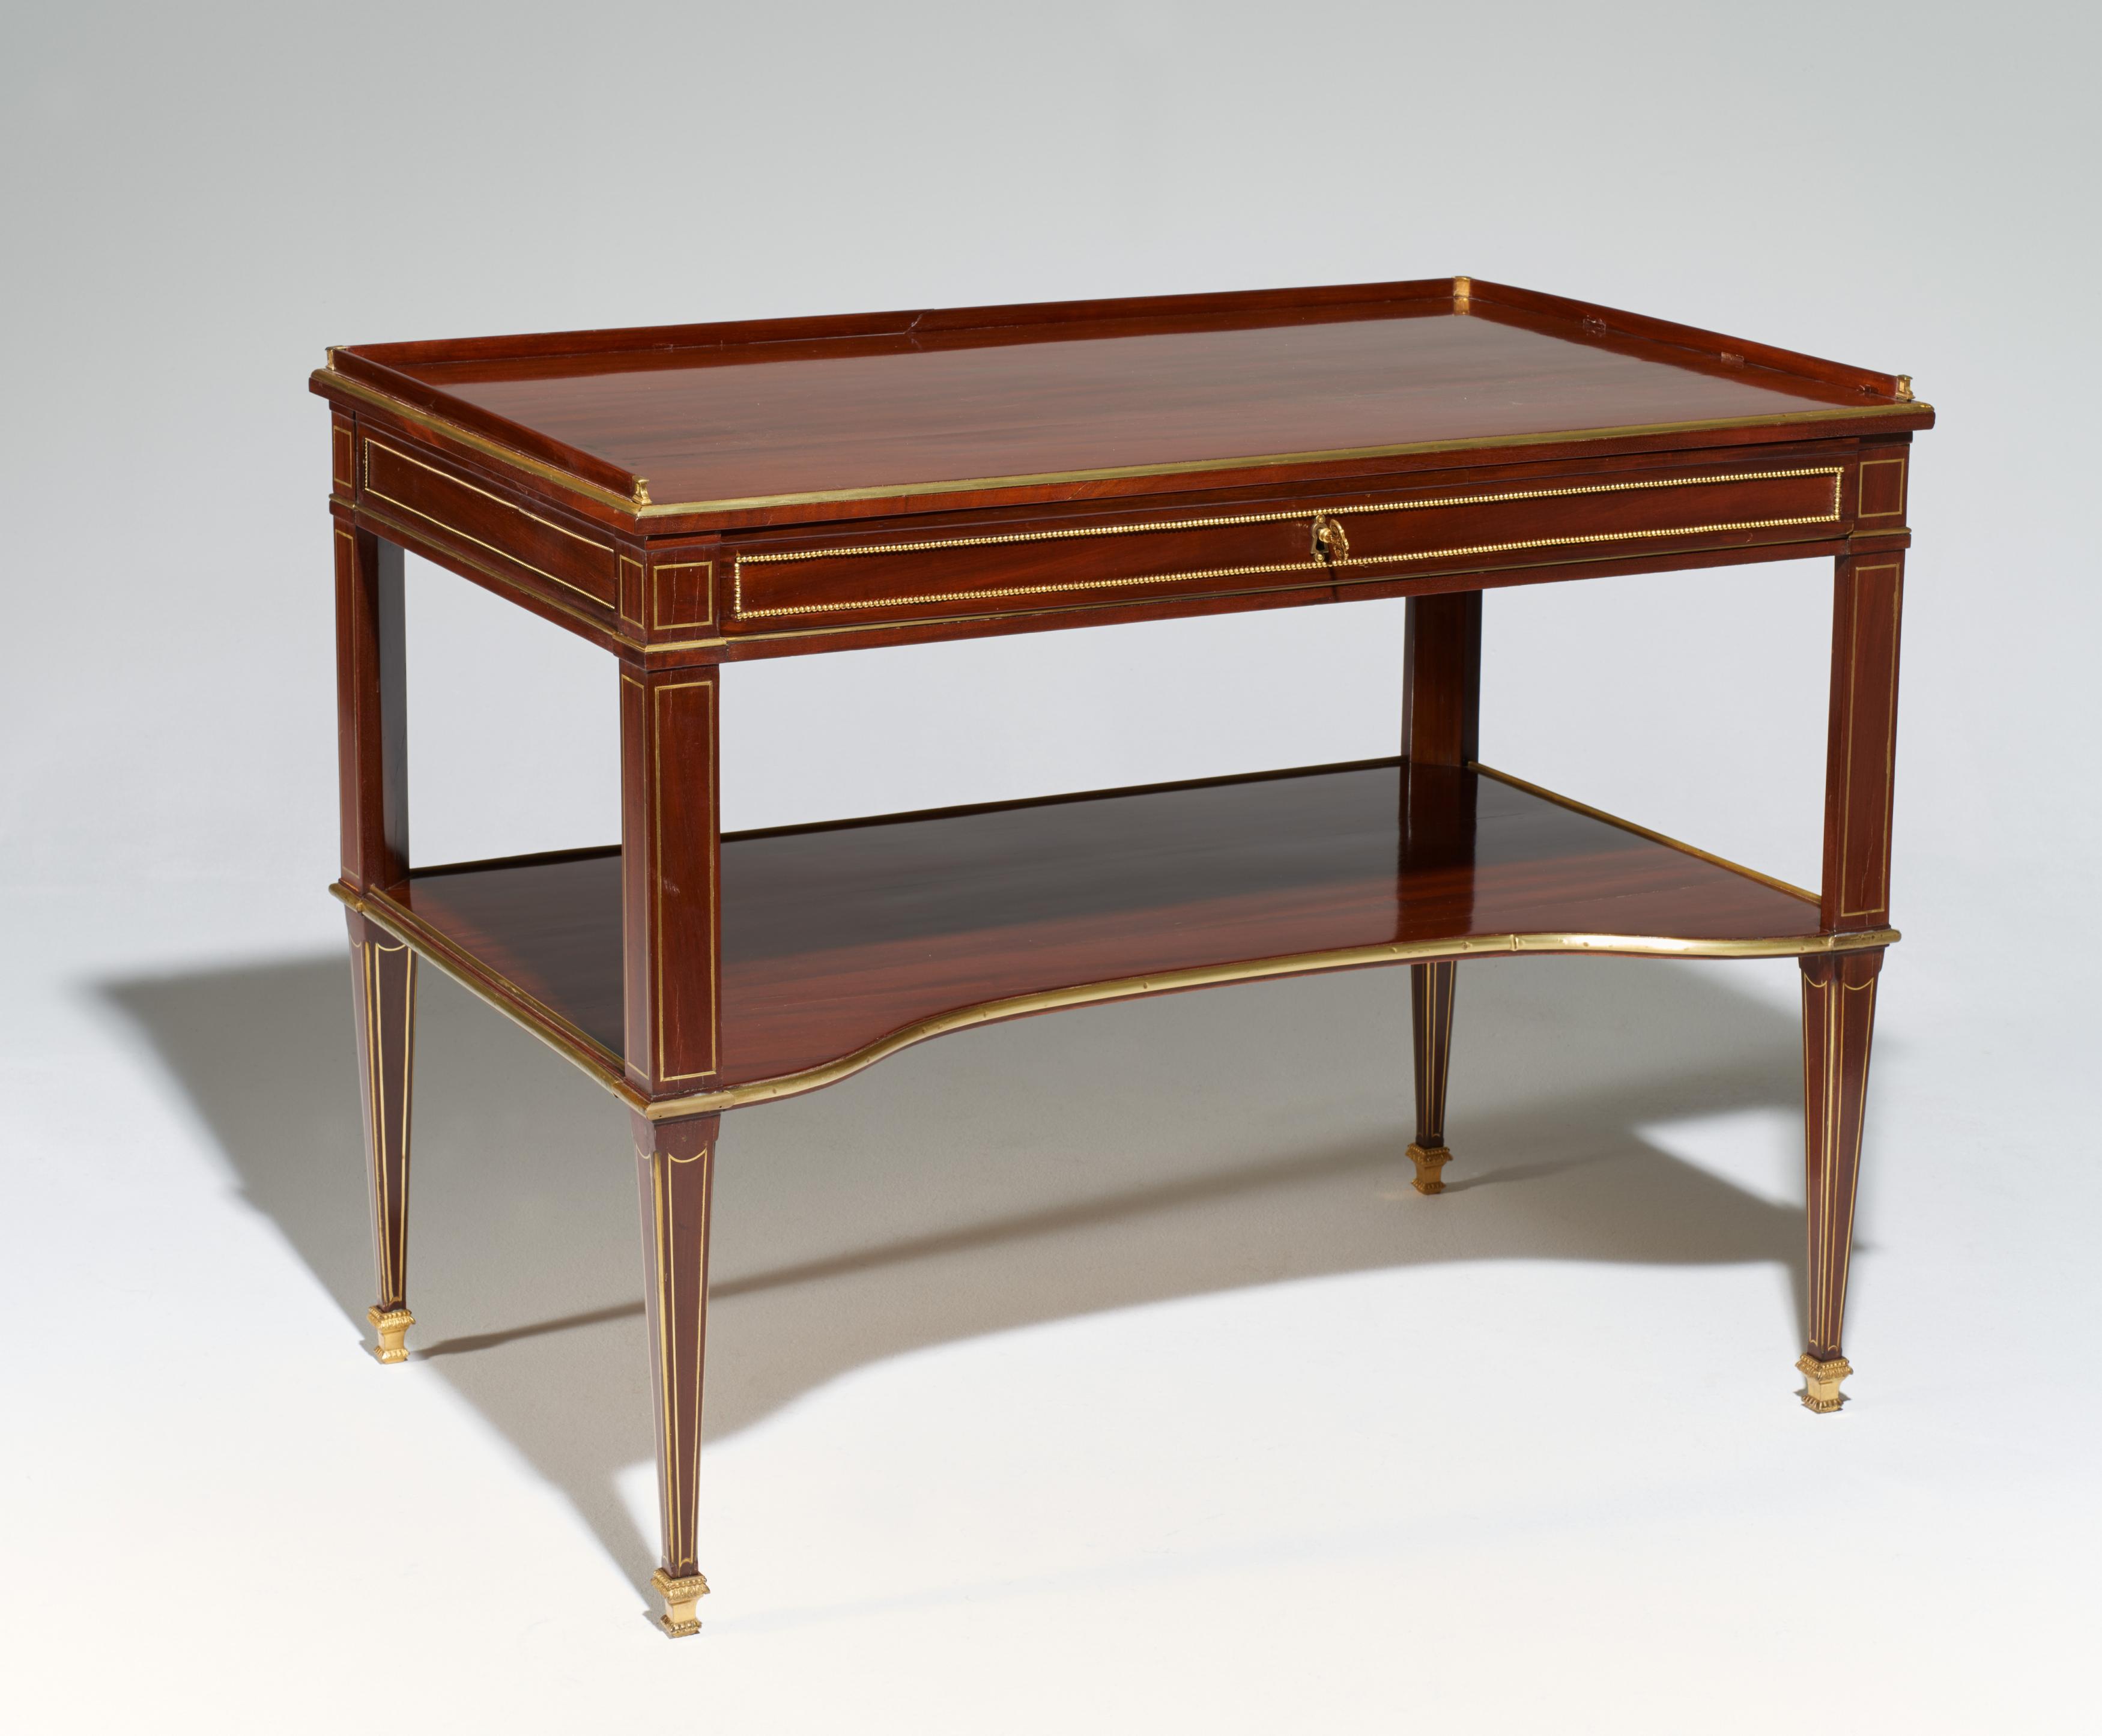 CLASSICISTICAL WRITING DESK MADE OF MAHOGANY ON SOFTWOOD AND LIME WOOD WITH CHERRY WOOD VENEER. - Image 2 of 4